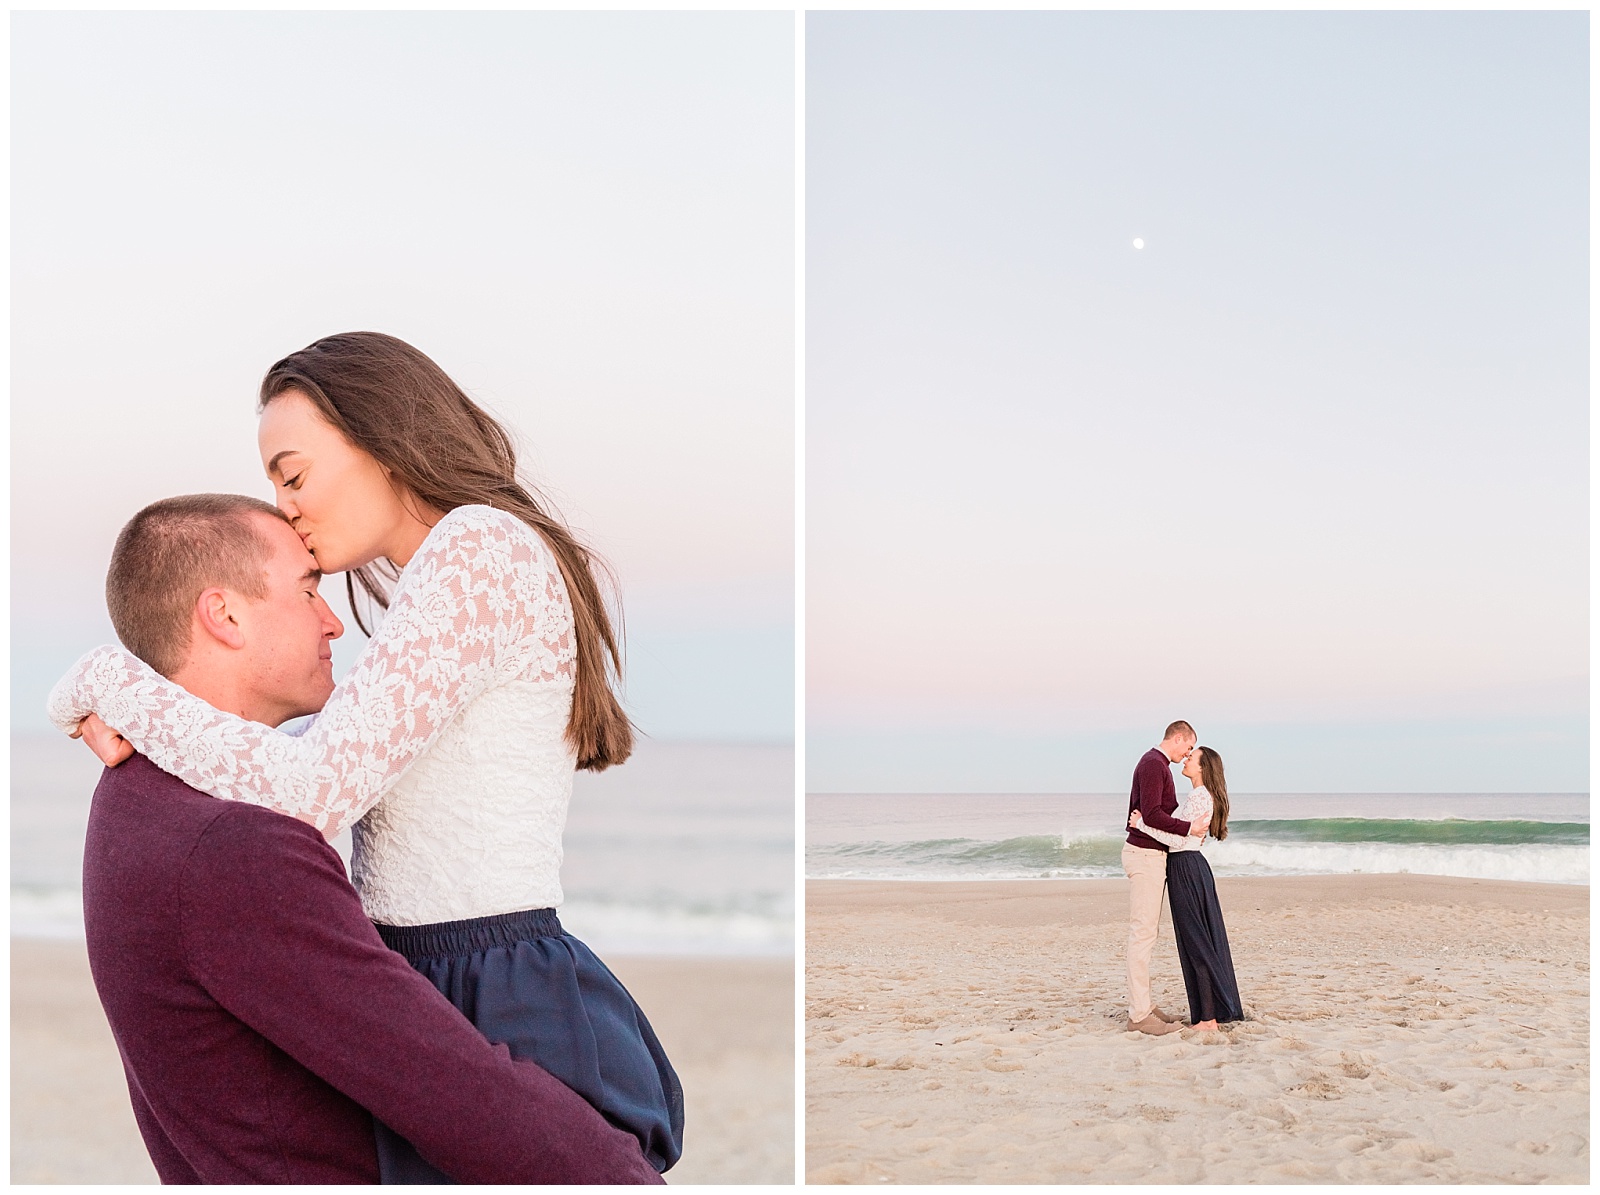 New Jersey, Engagement Session, Wedding Photographer, Beach, Sunset, Shore, Engaged, In love, Moon, Dusk